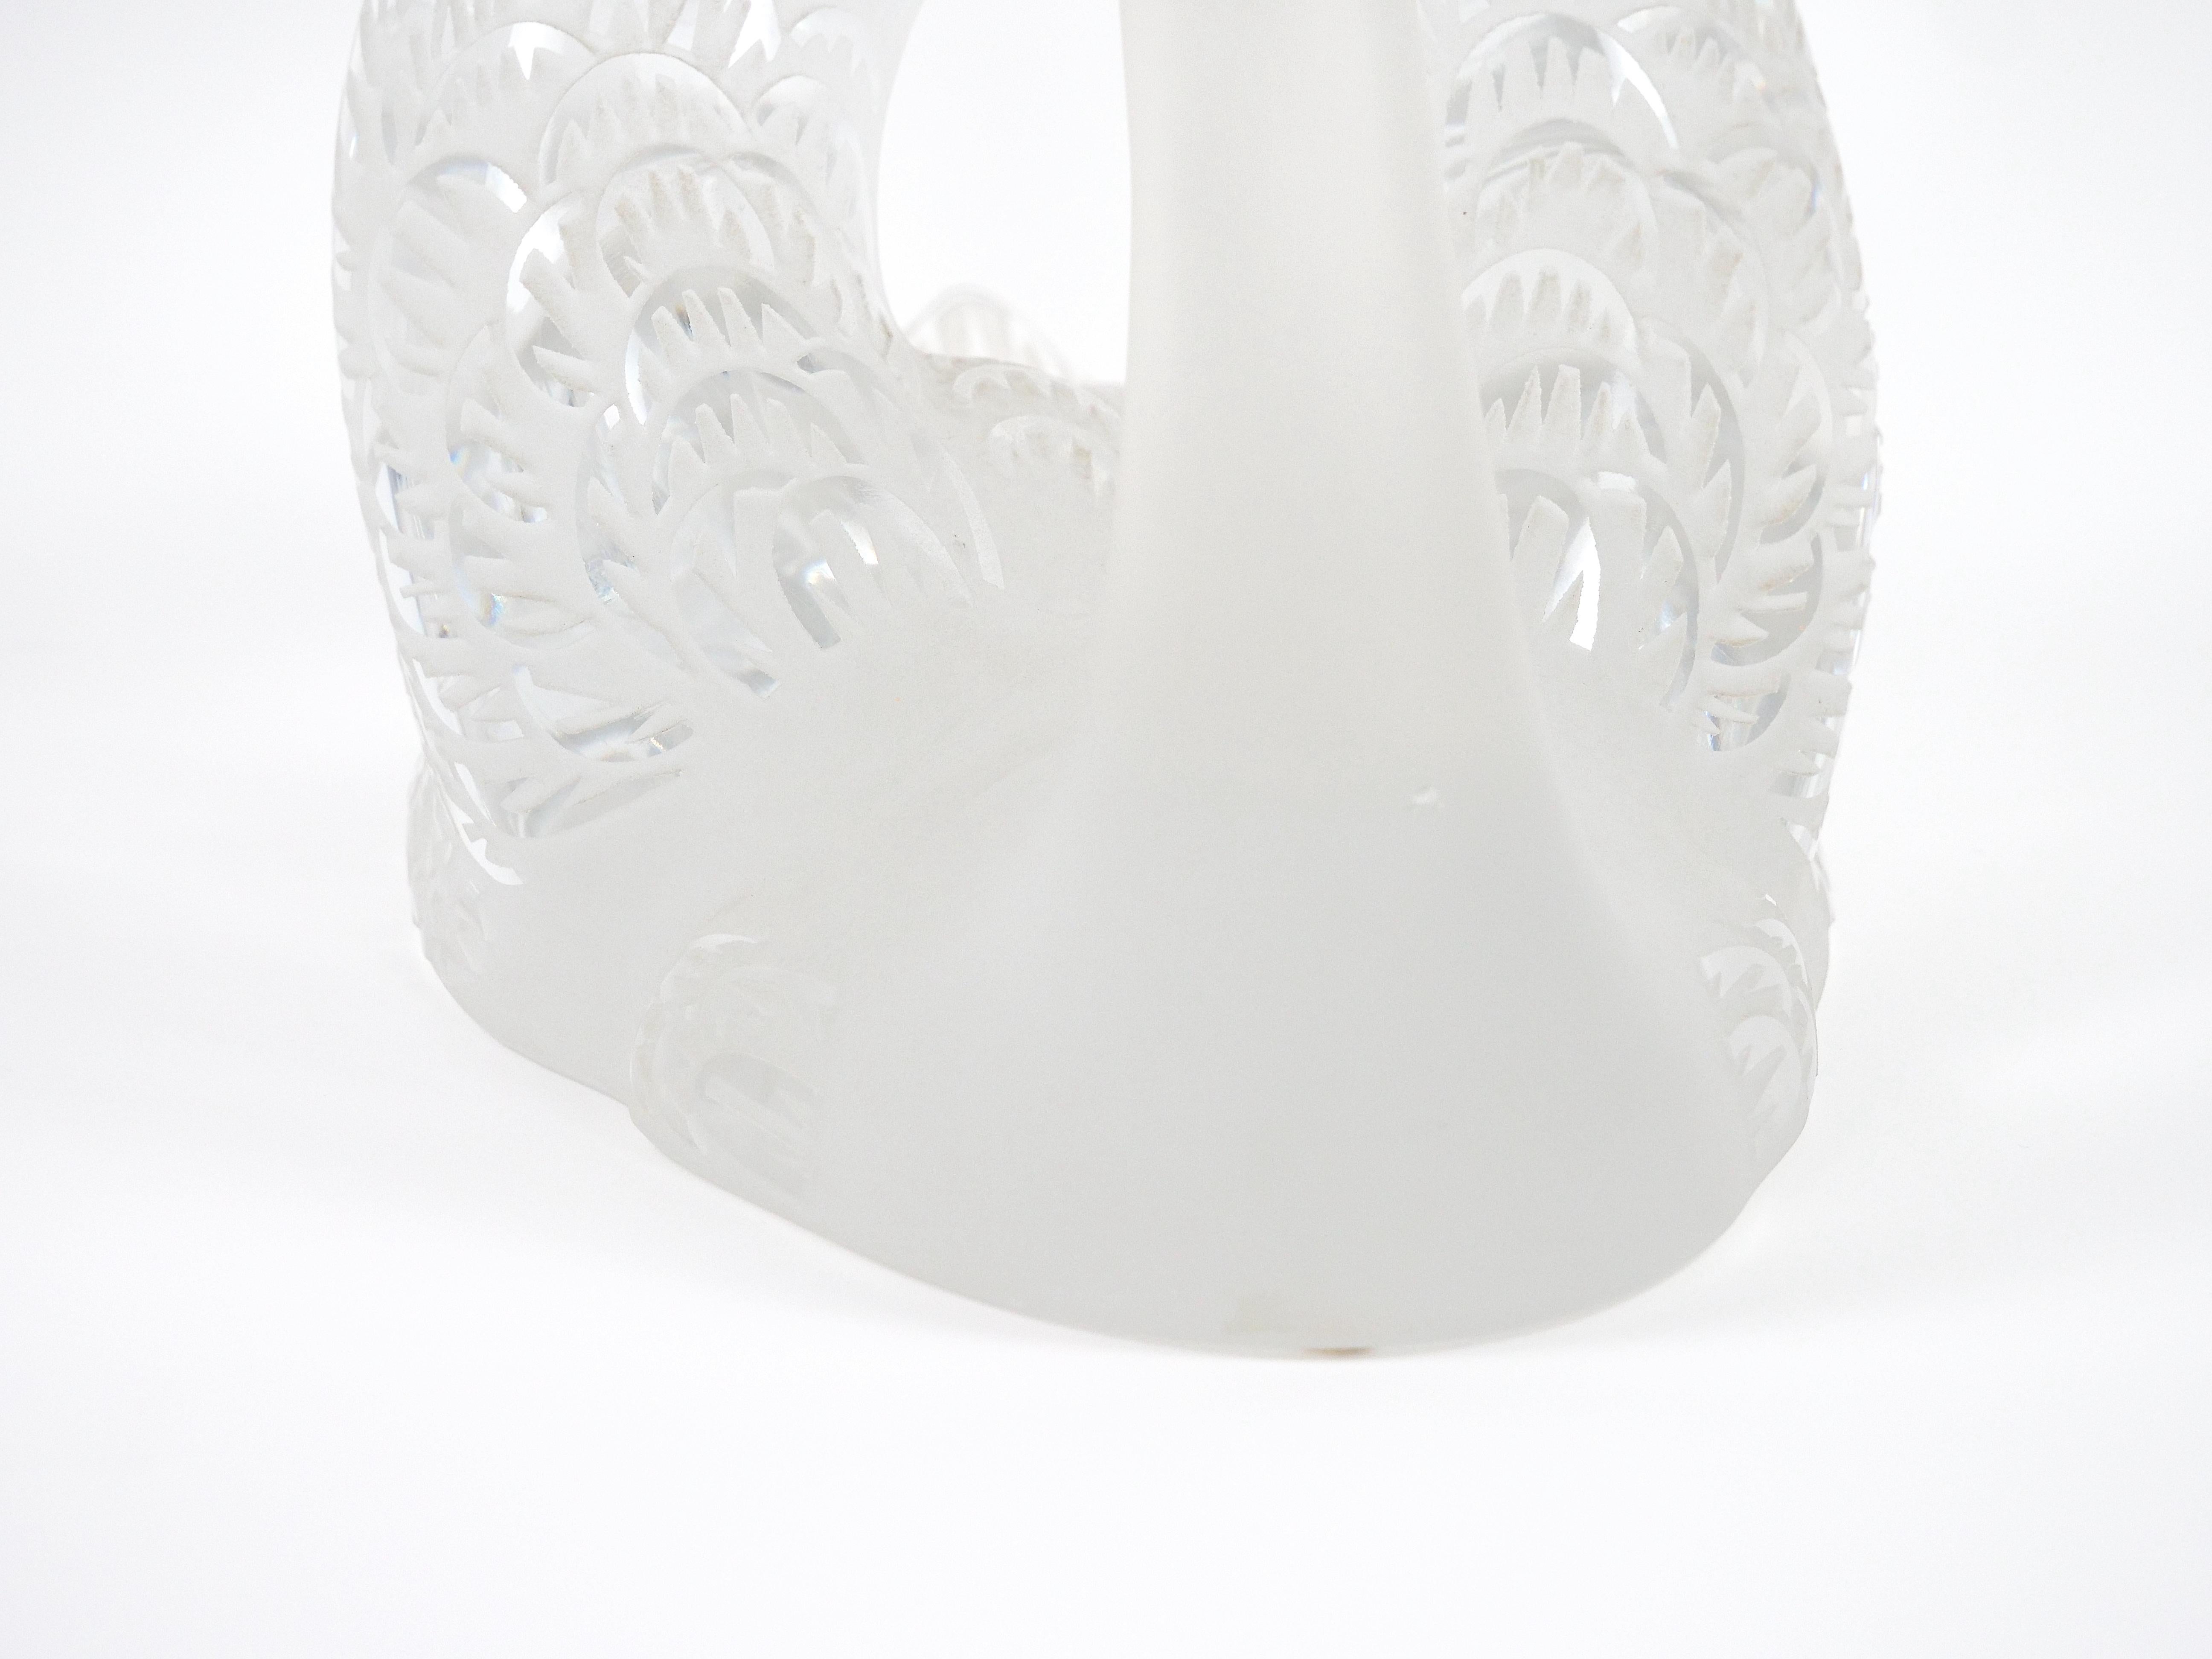  Lalique Crystal Frosted Head Down Swan Sculpture Resting On Mirrored Plateau en vente 7